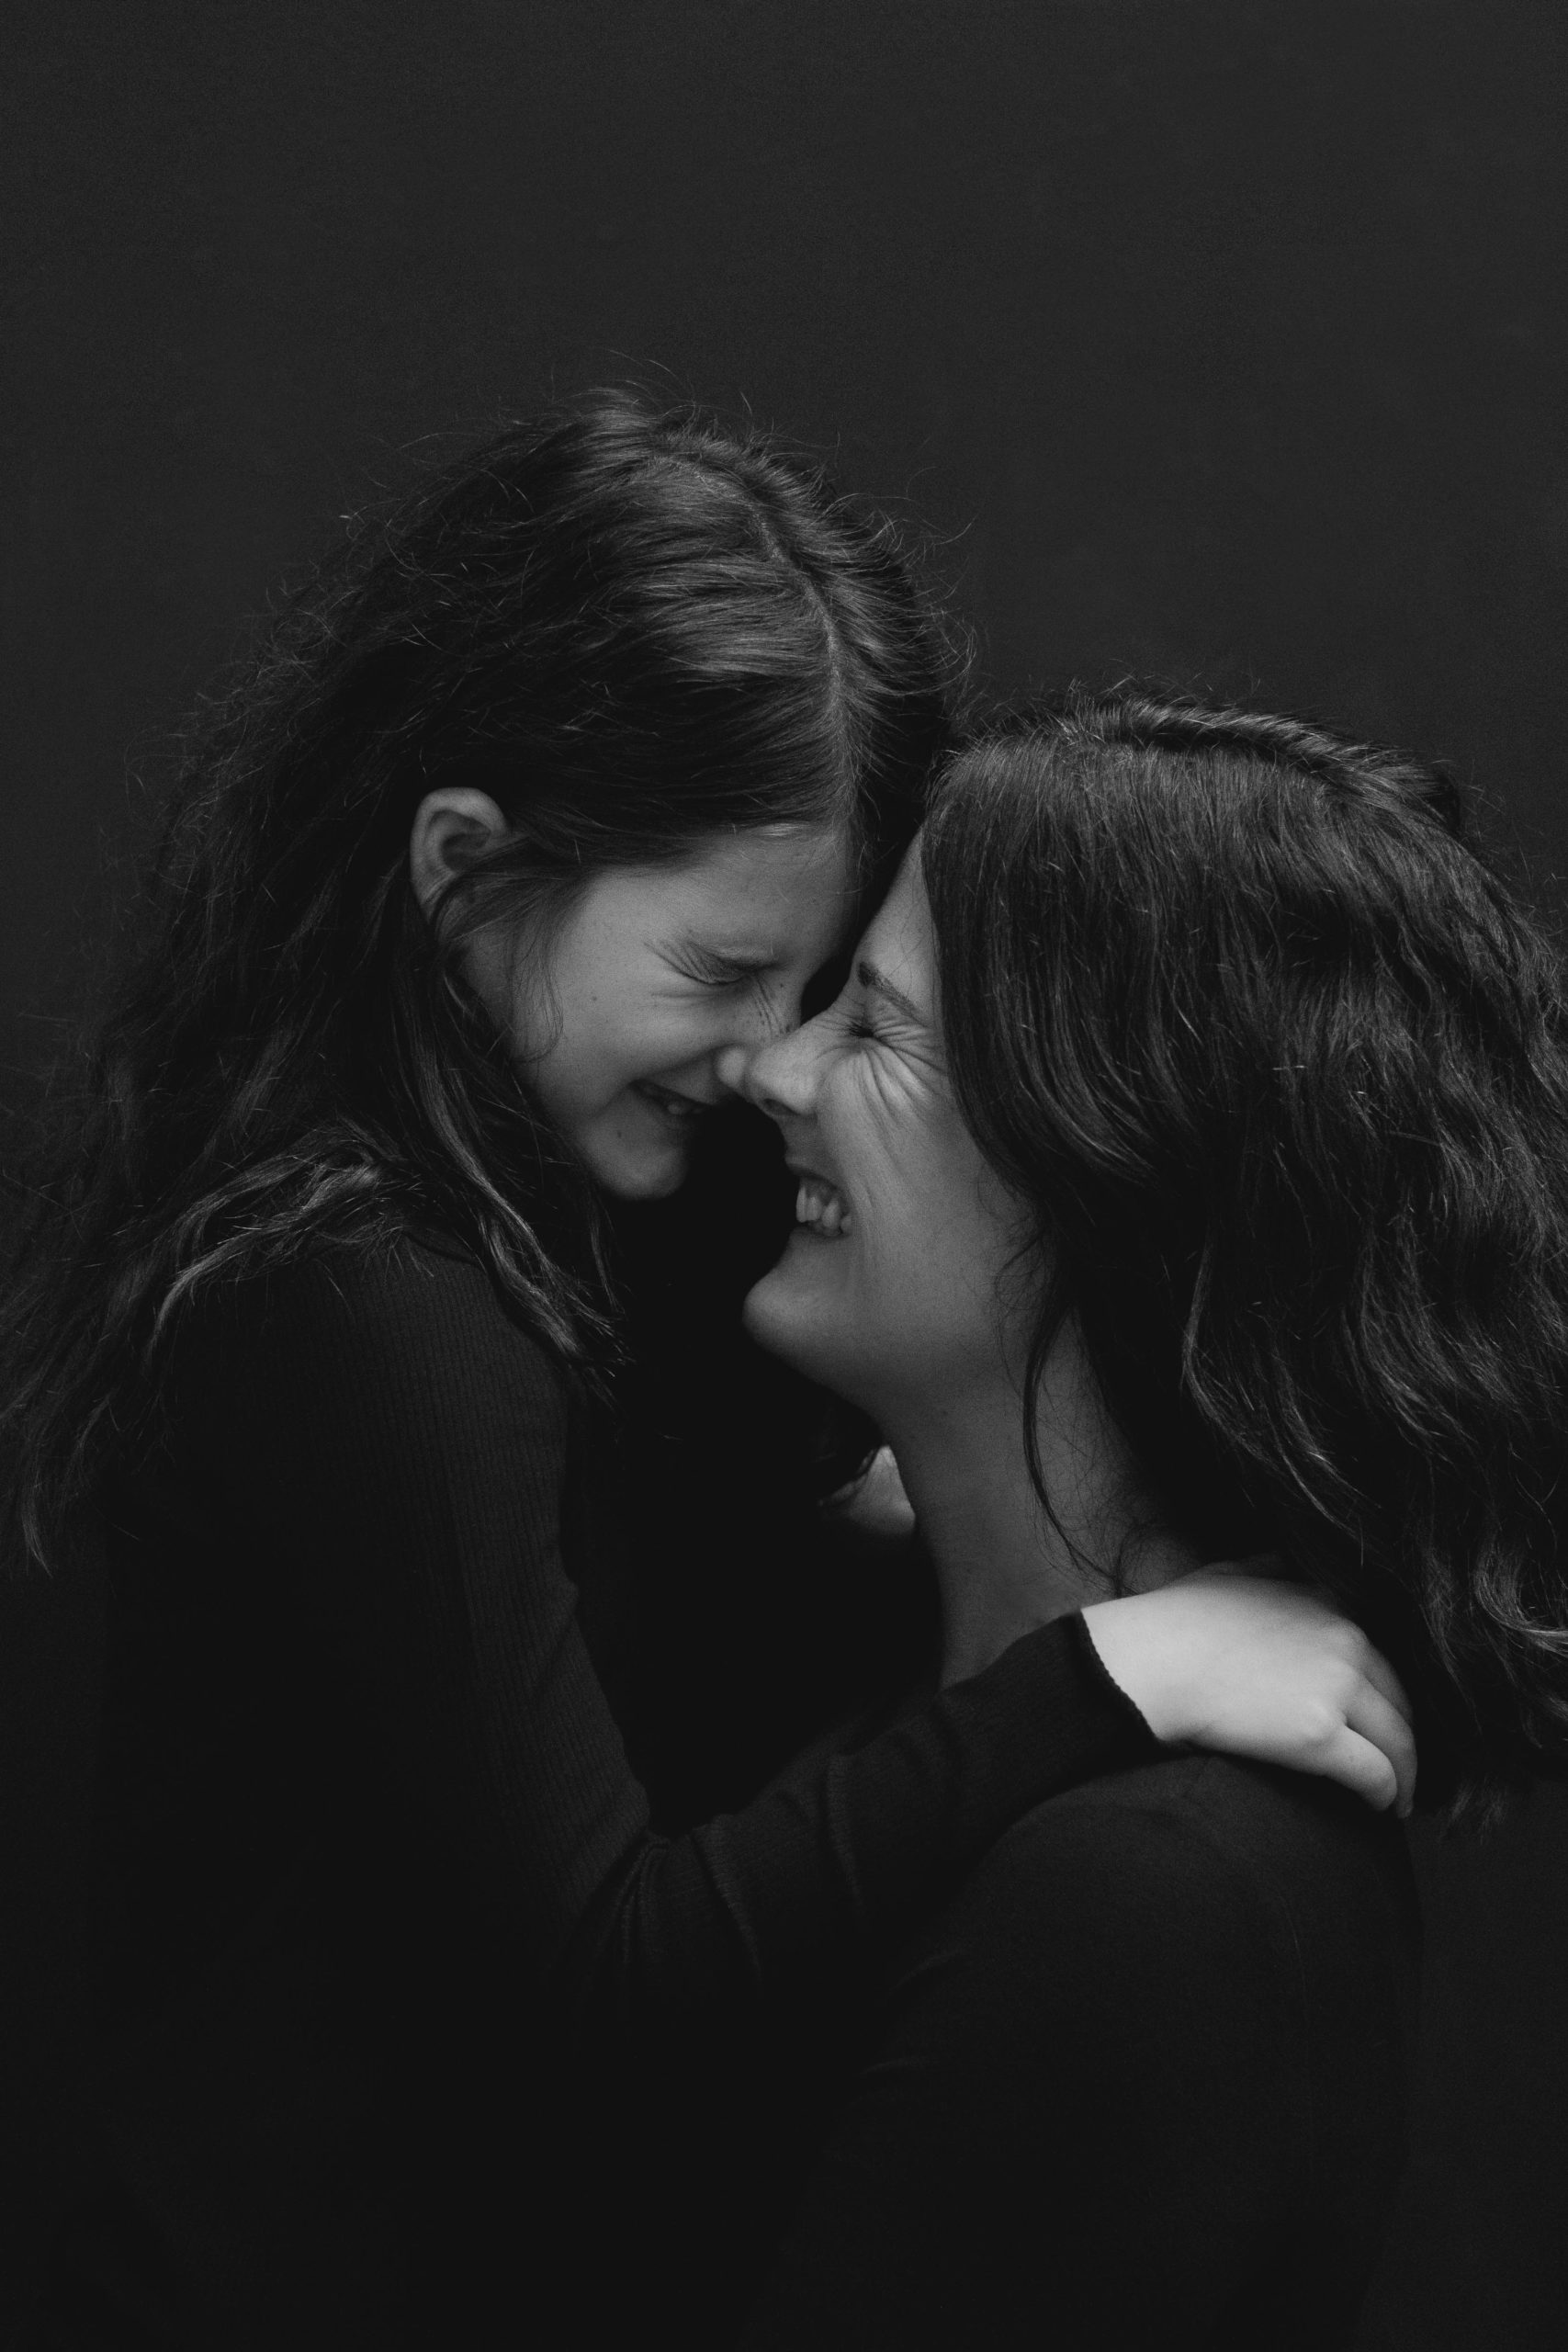 Black and white images of a young girl and mother laughing with noses touching